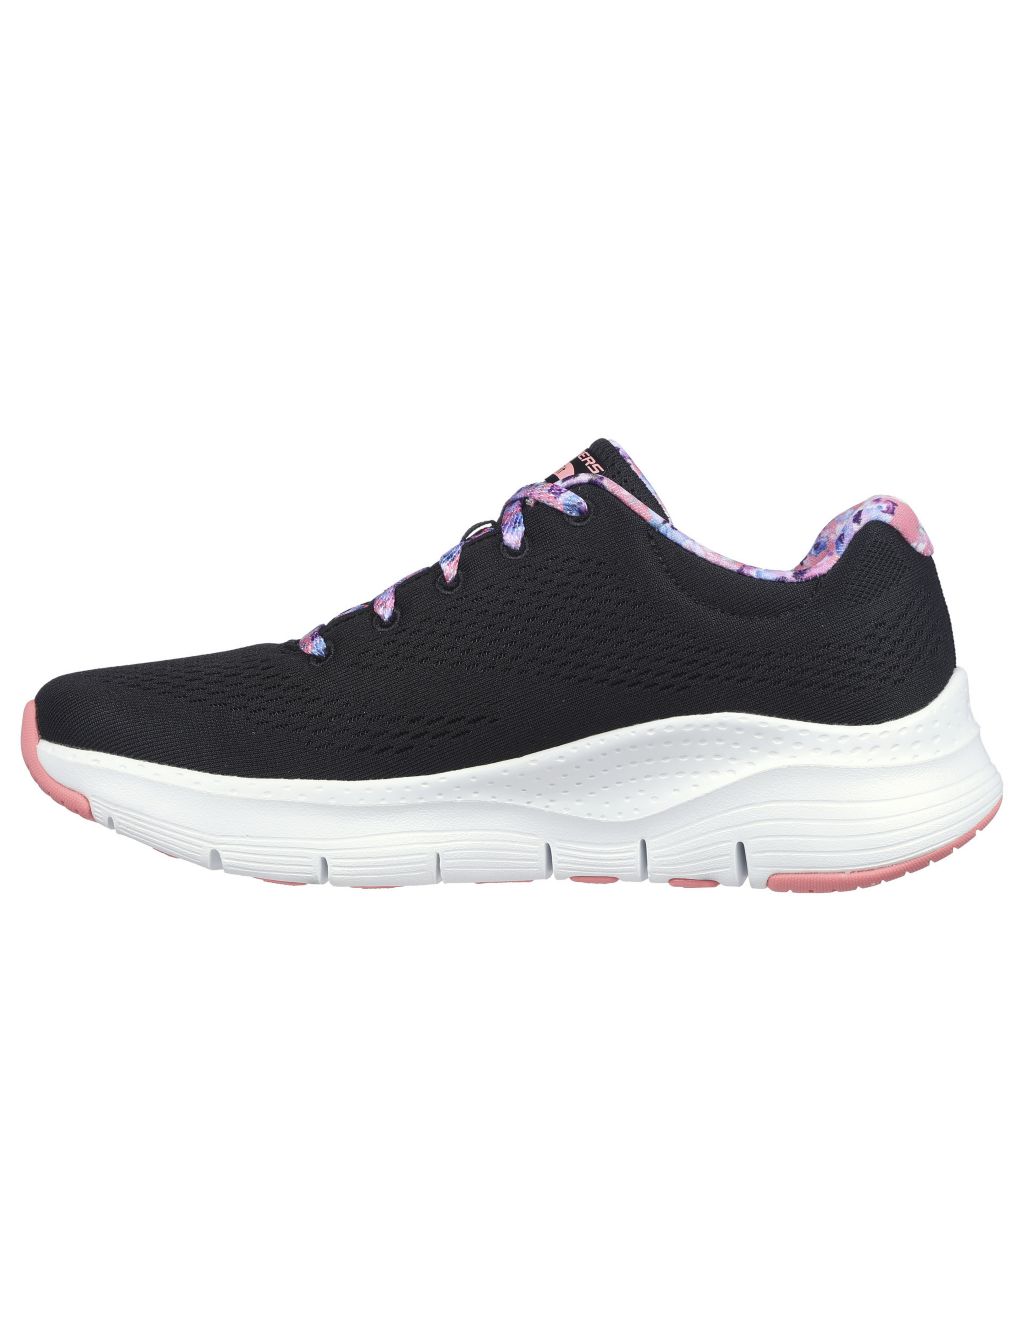 Arch Fit First Blossom Lace Up Trainers image 4